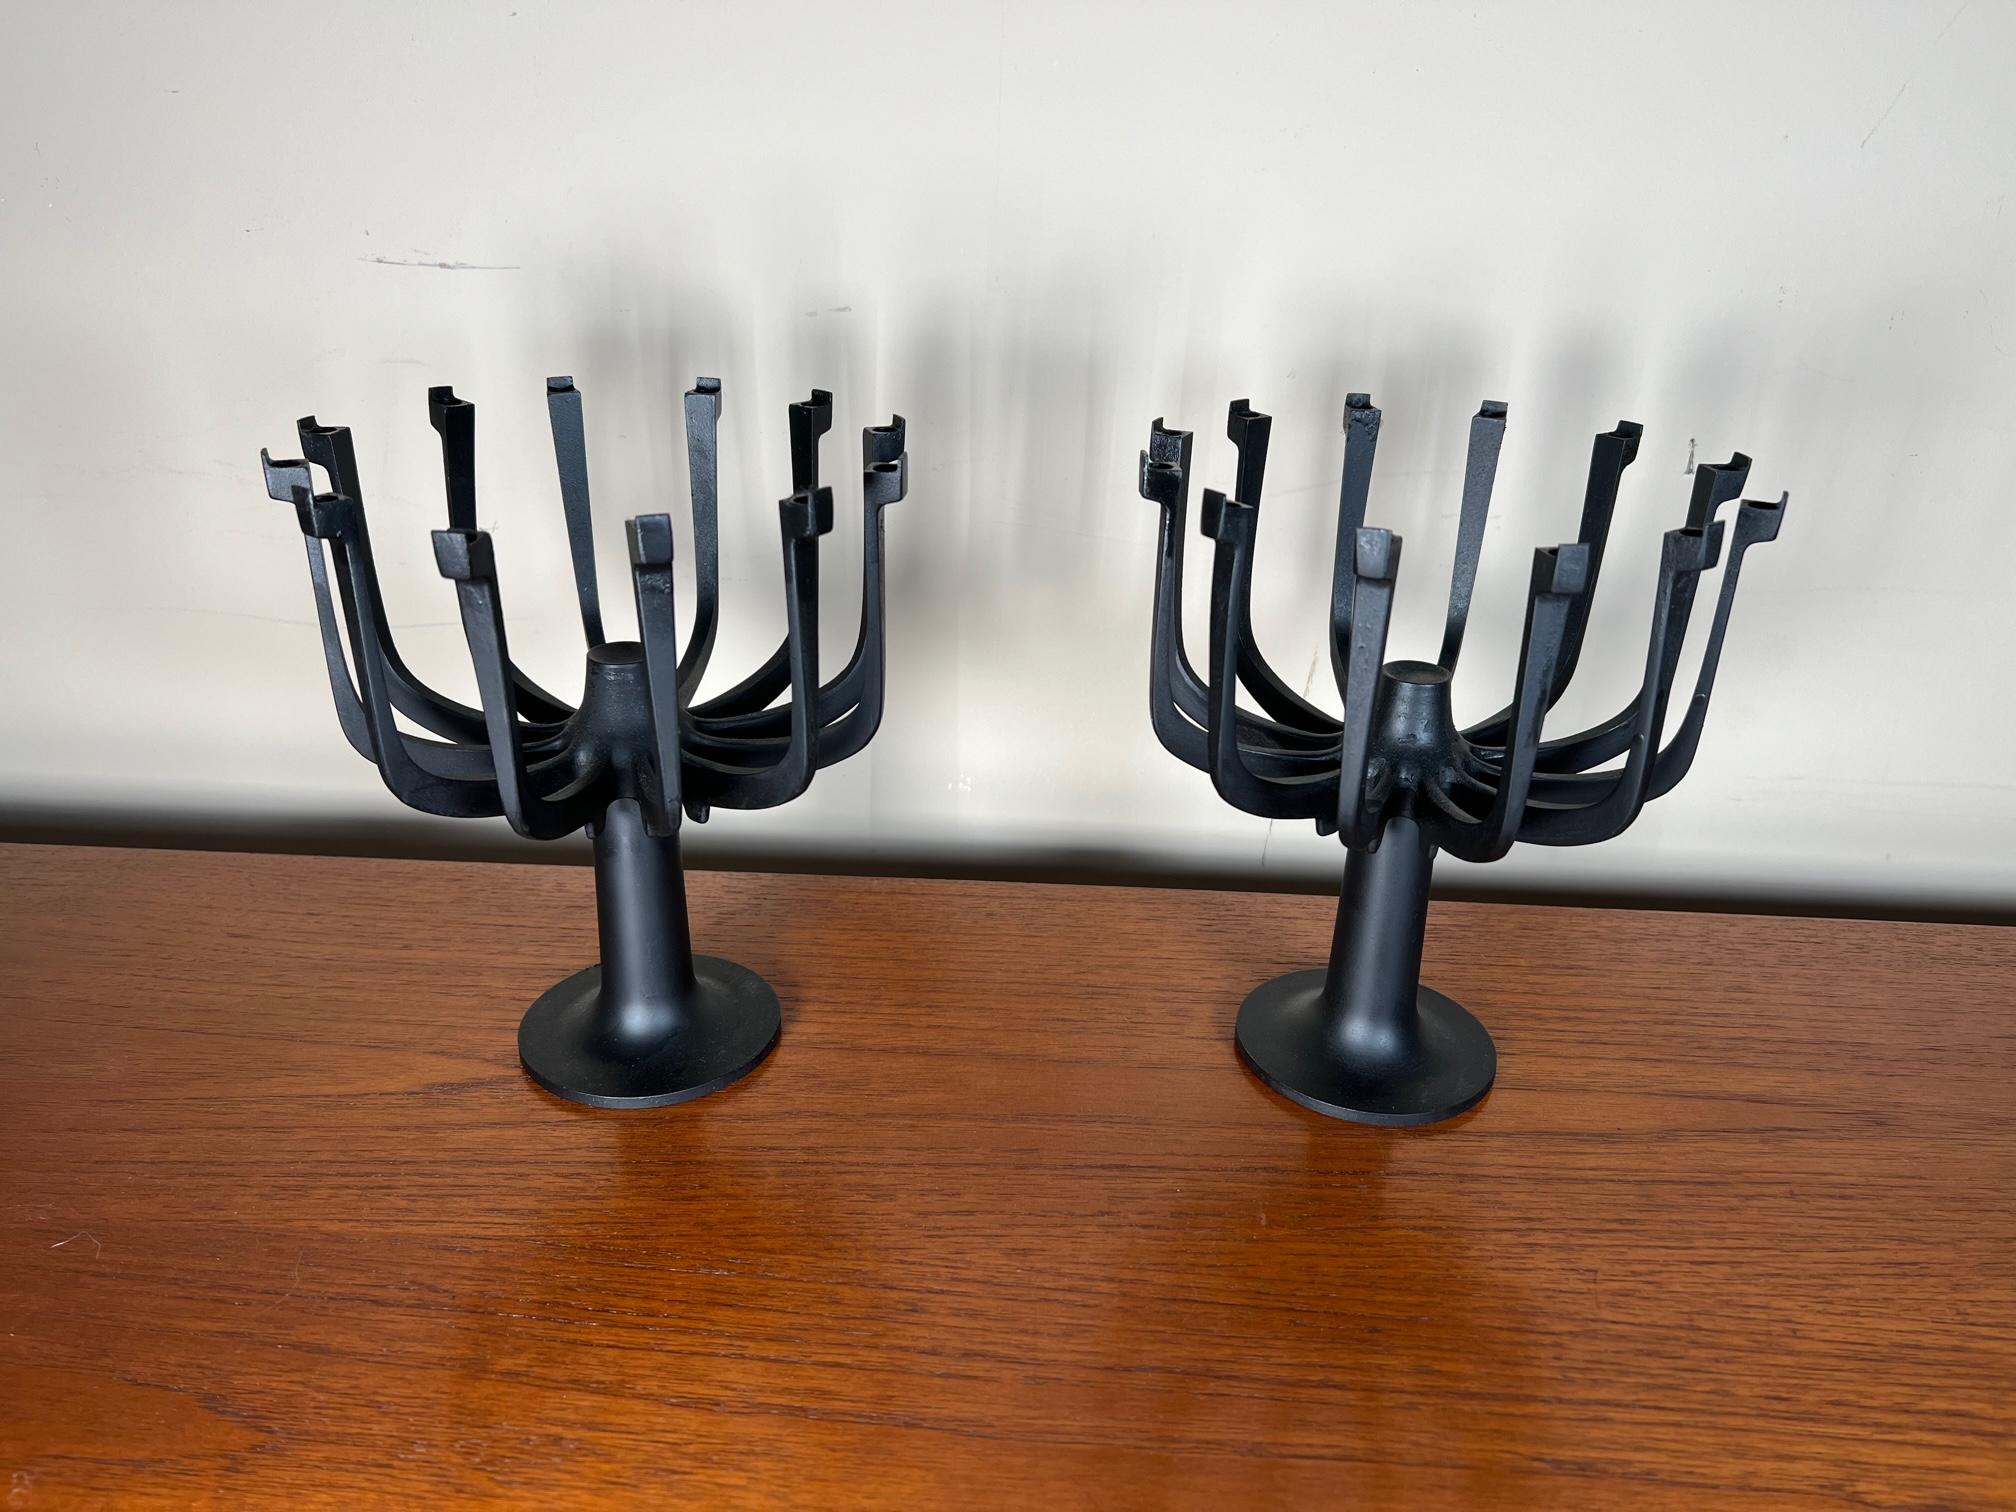 Pair of cast iron candleabras by Gunnar Cyren for Dansk. Stamped underneath. Holds 12 thin candles each. Candles not included.
Very good condition. Minor wear. Last photo is for display only. Credenza and painting not included.
Dimensions: 7